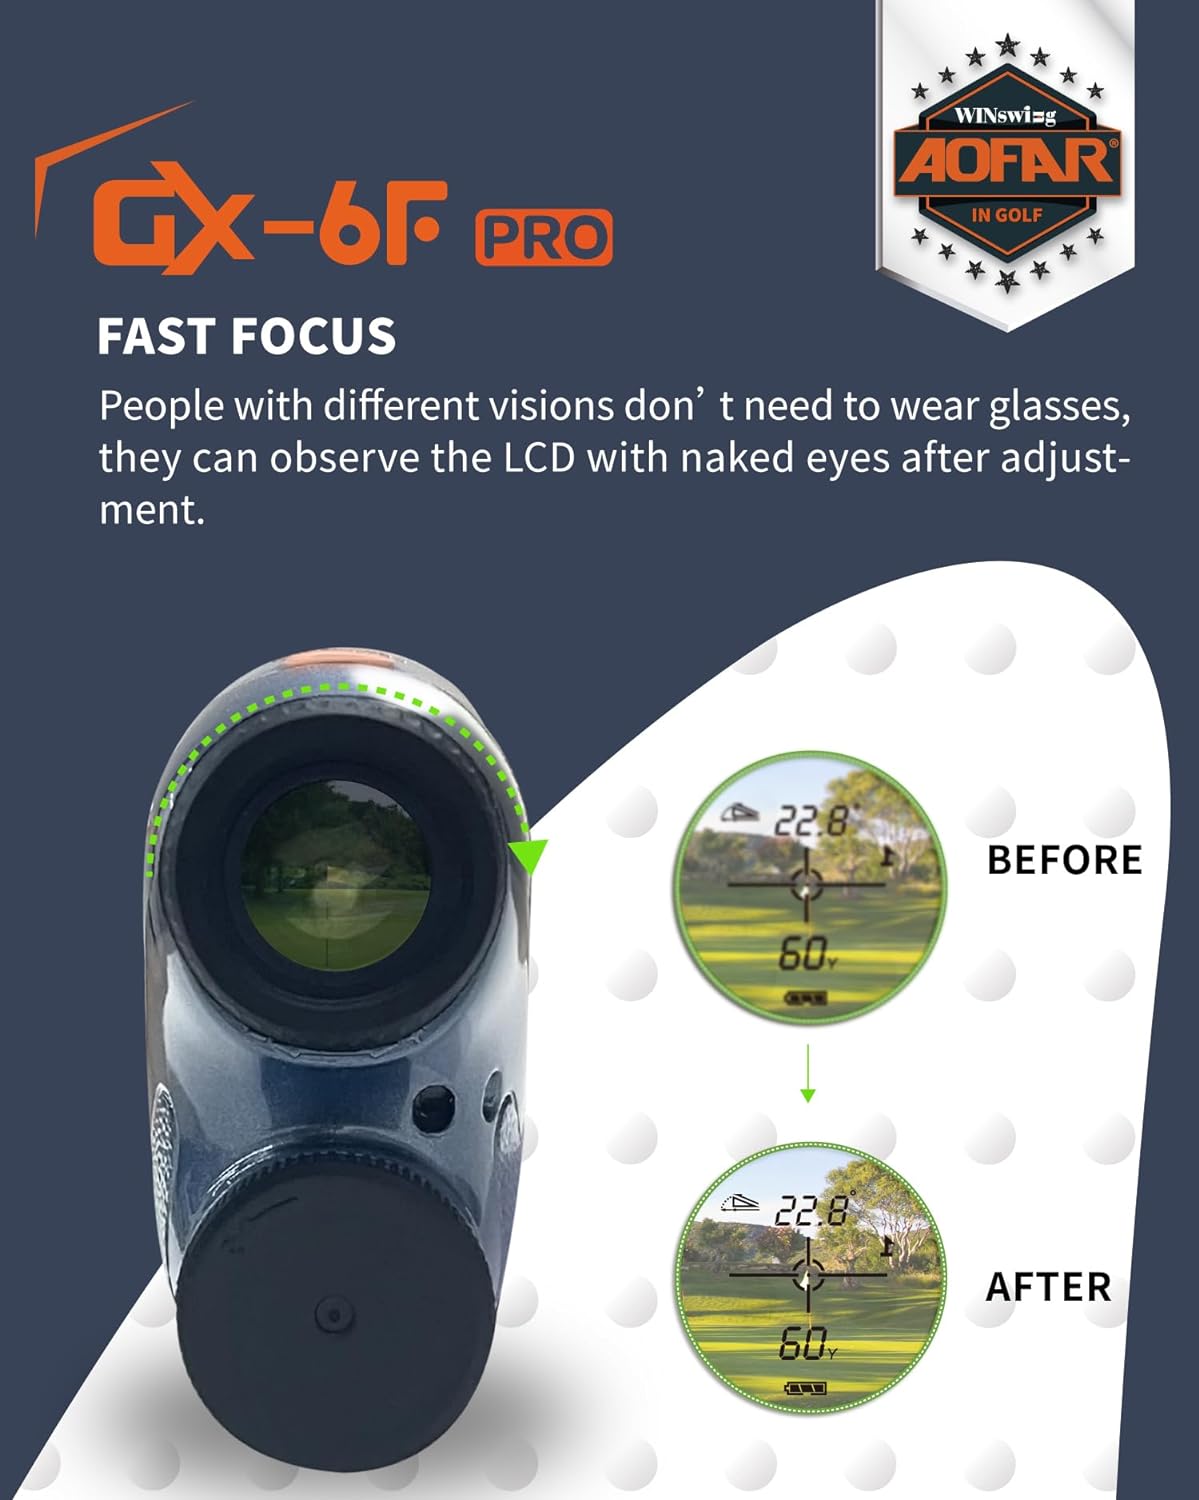 AOFAR GX-6F PRO Golf Rangefinder Update Version, with Slope and Angle Switch, Flag Lock with Pulse Vibration and Closer Scanning, Continuous Scan, Measures up to 600 Yards, Readings Fast and Accurate